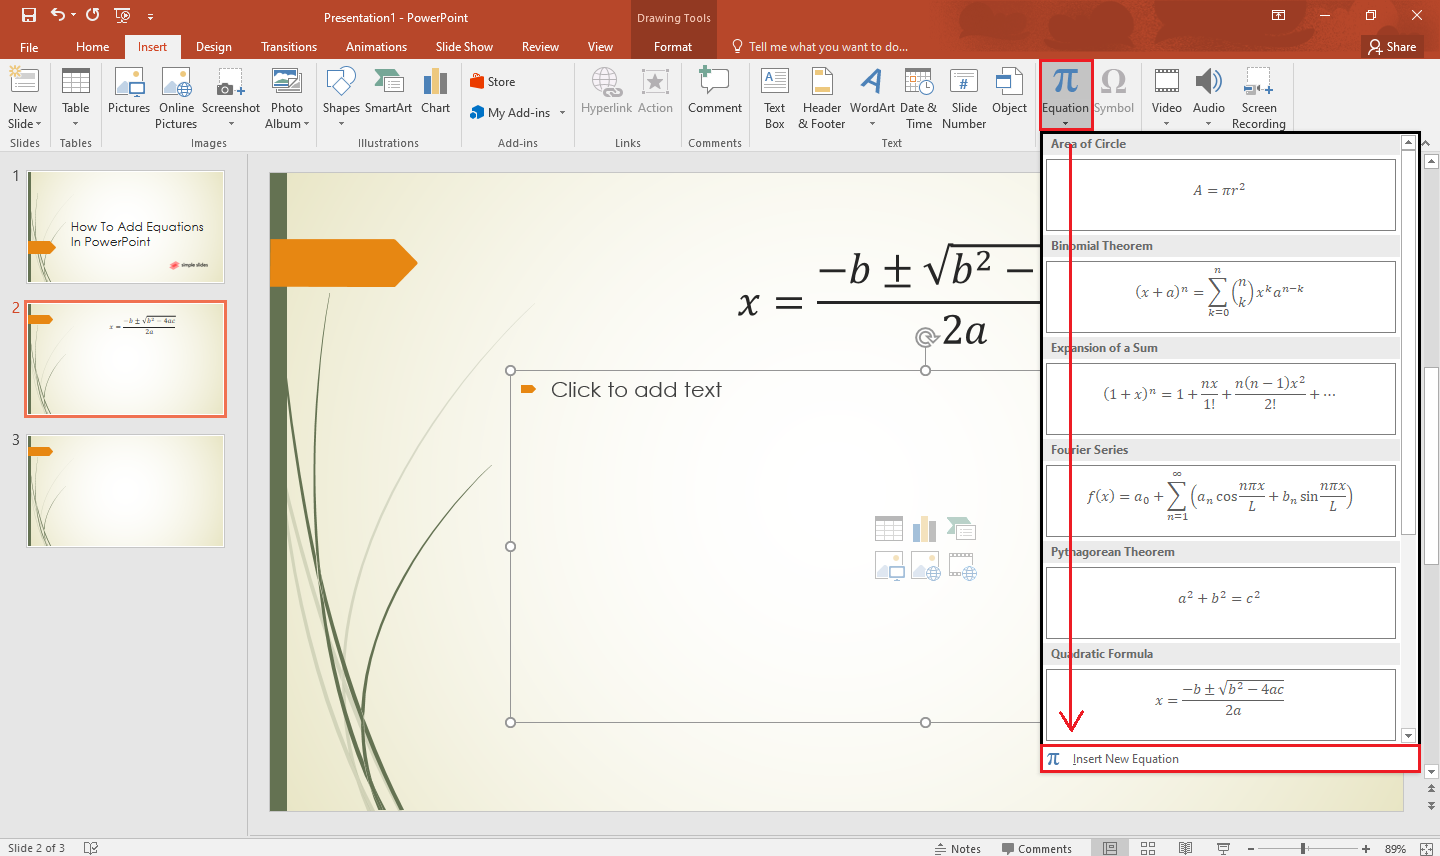 Select the "Insert New Equation" in the drop-down menu to manually add new equations in your slide.